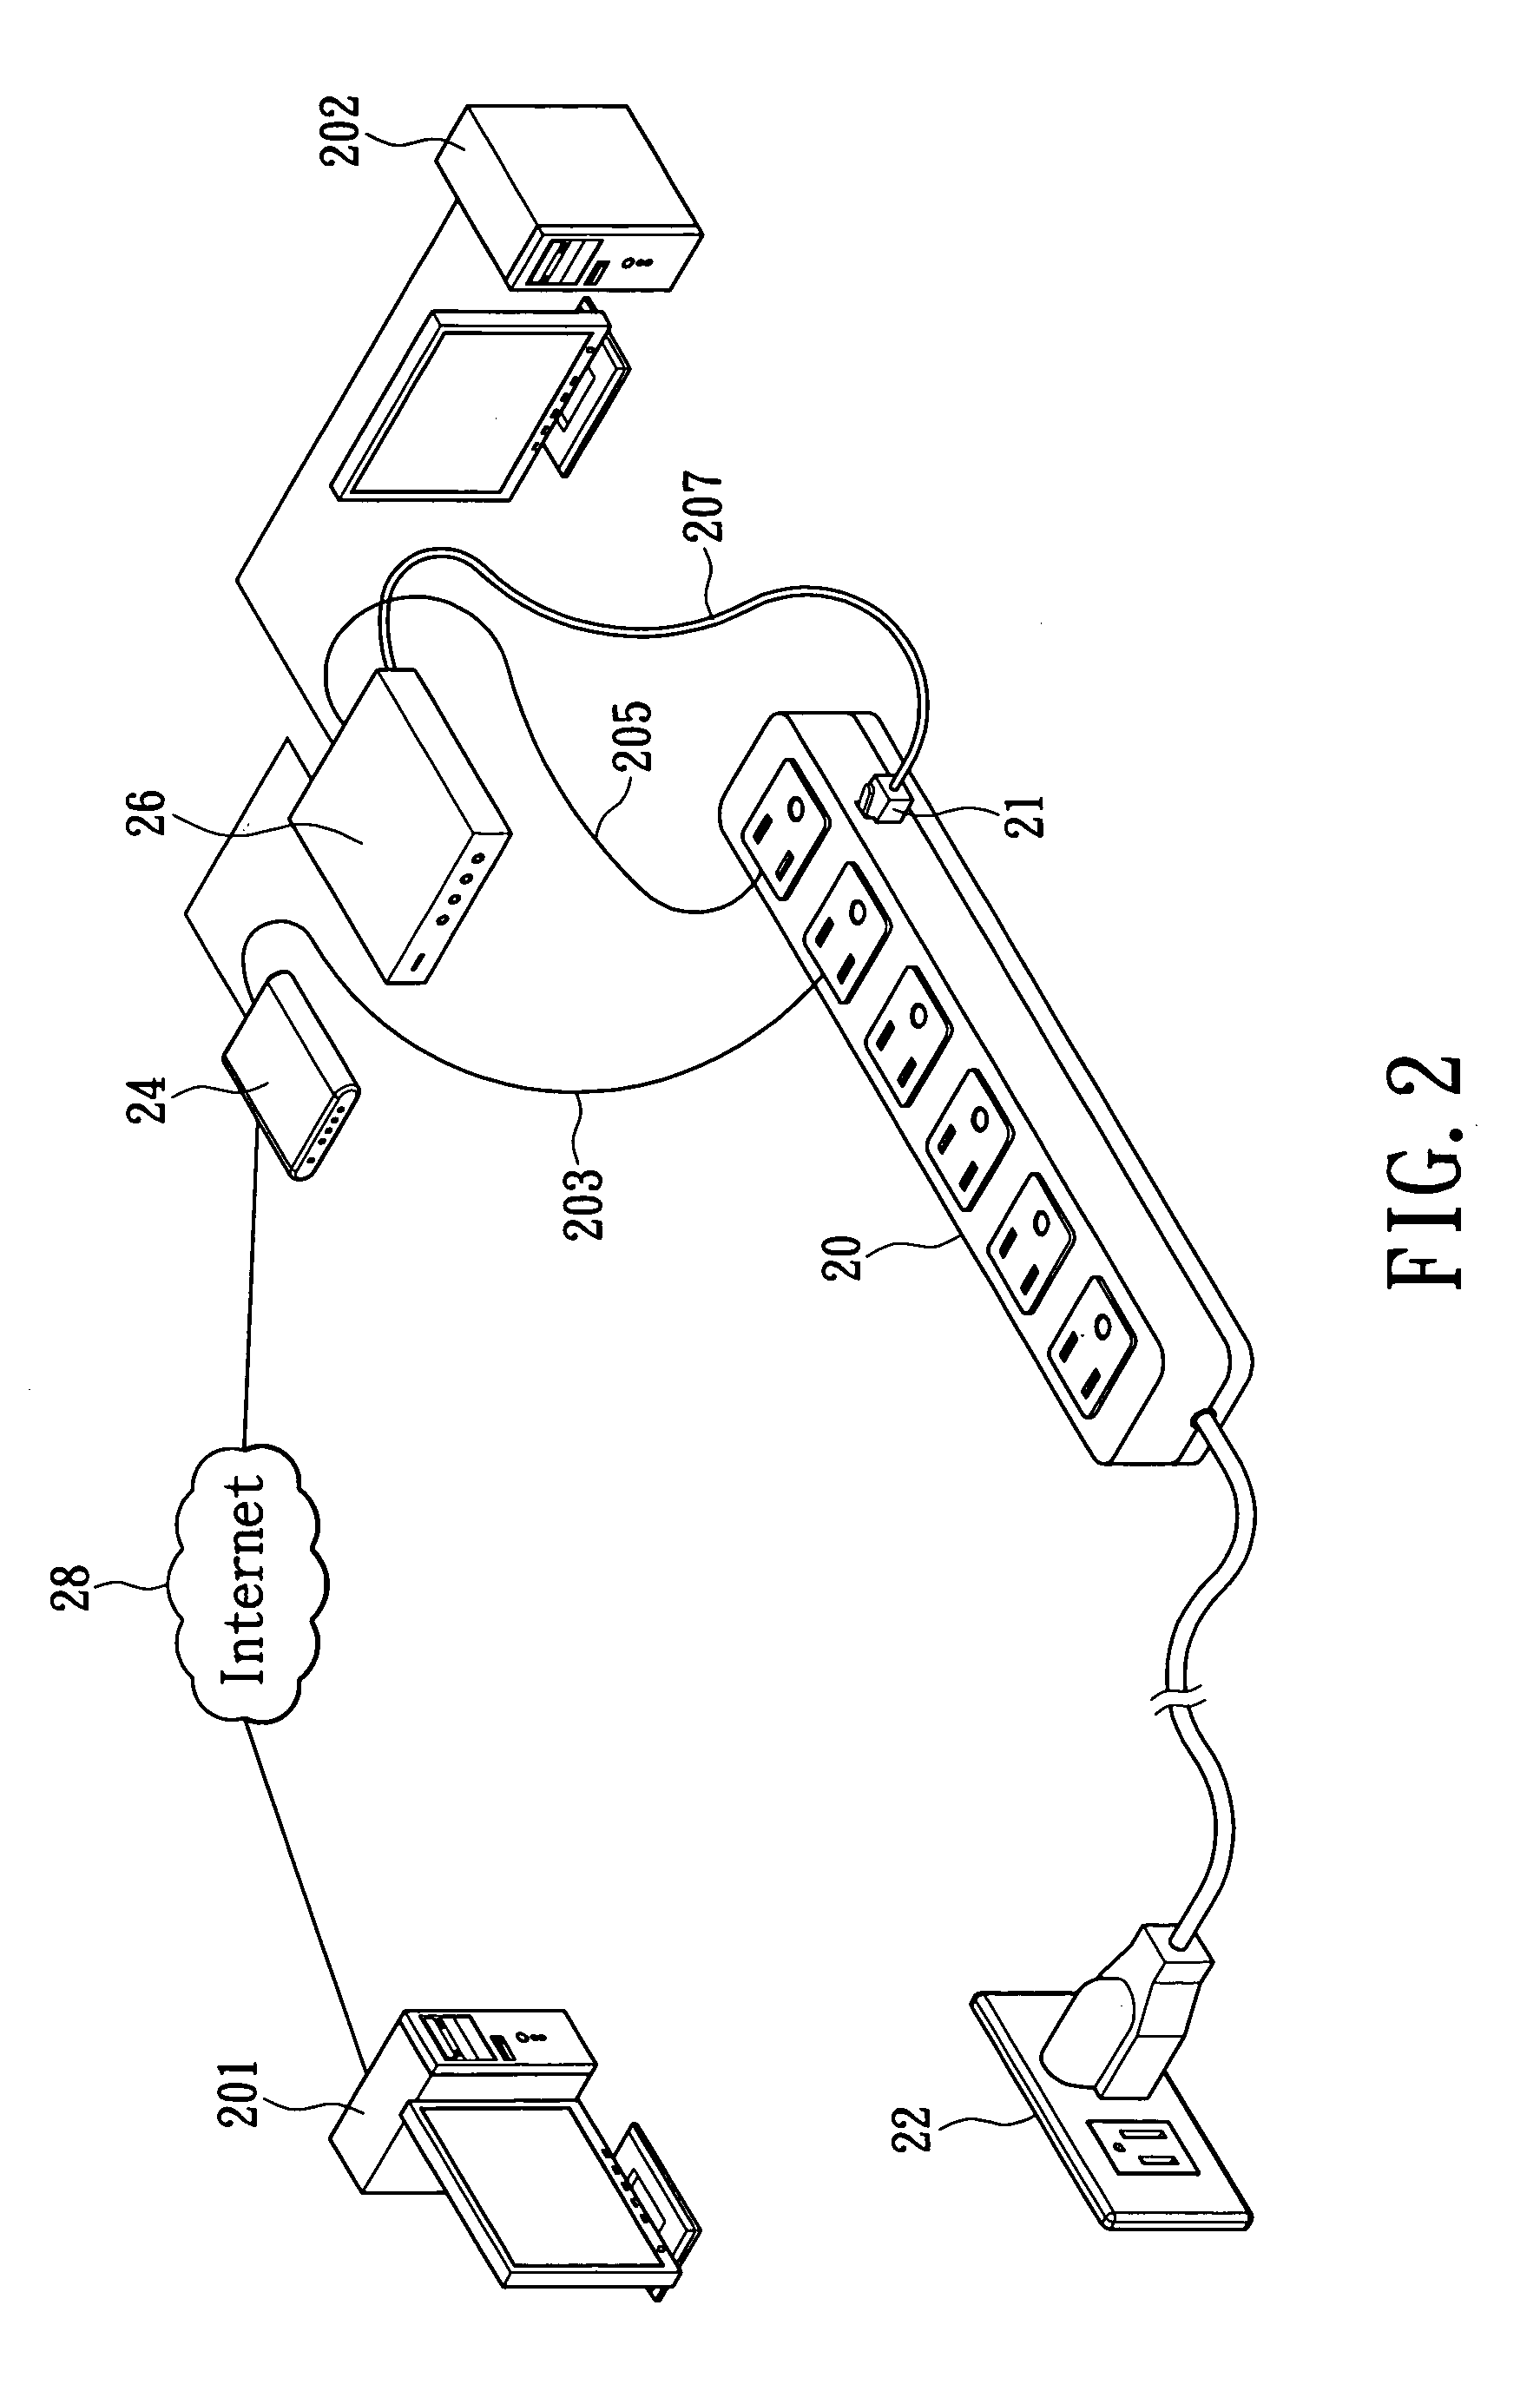 Apparatus power restart method in response to network connection status